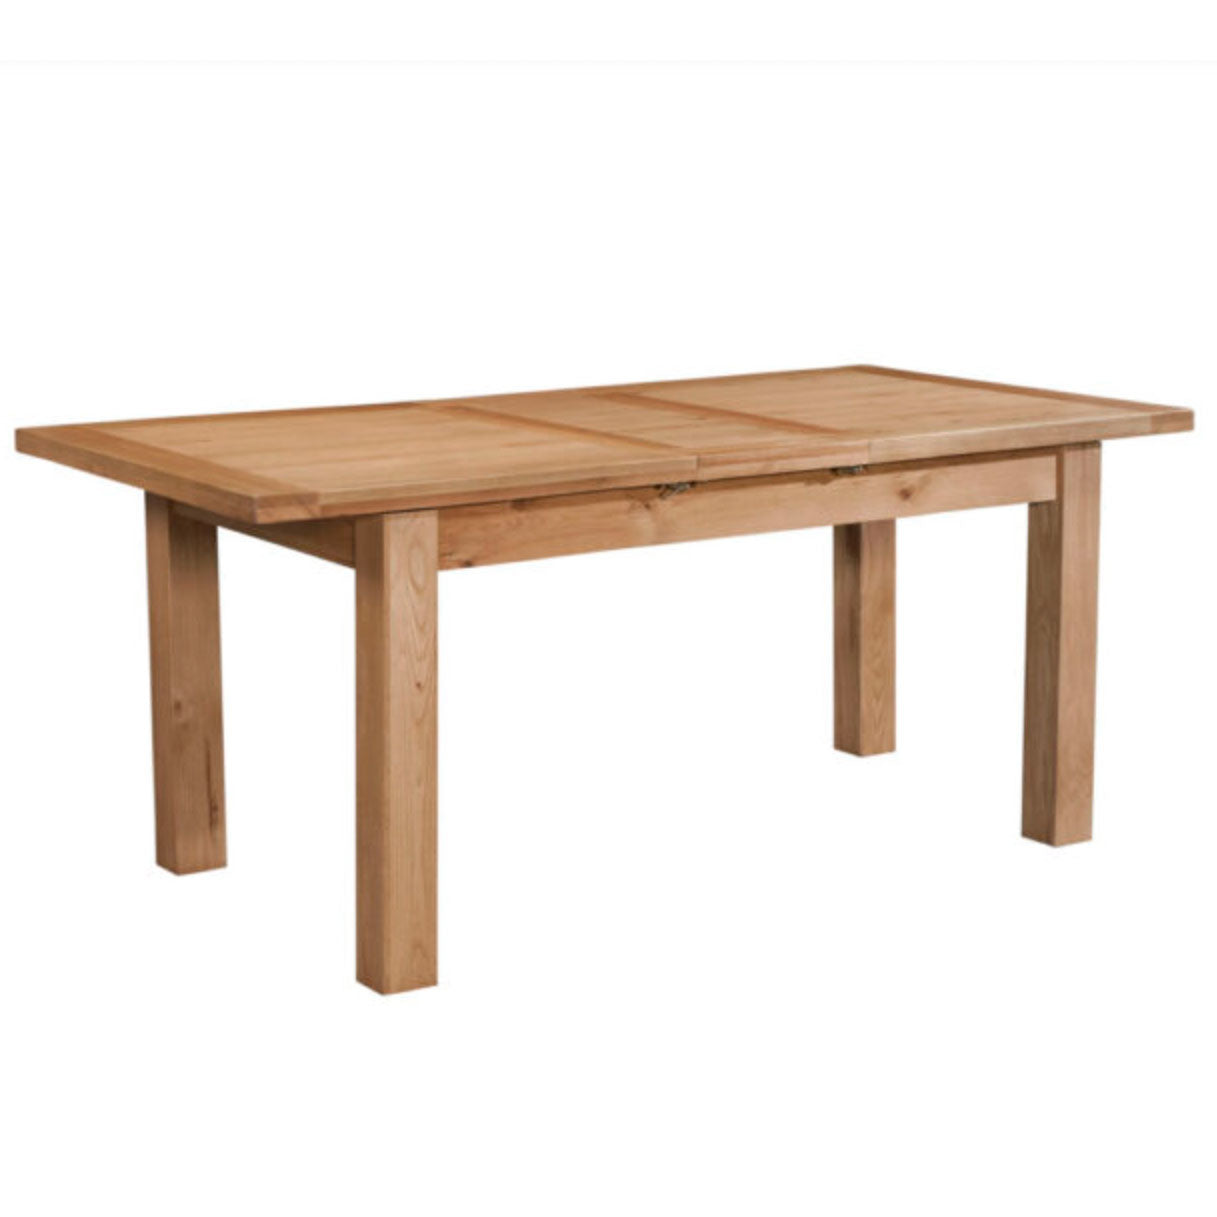 Manor Collection Dorset Oak Small Extending Dining Table